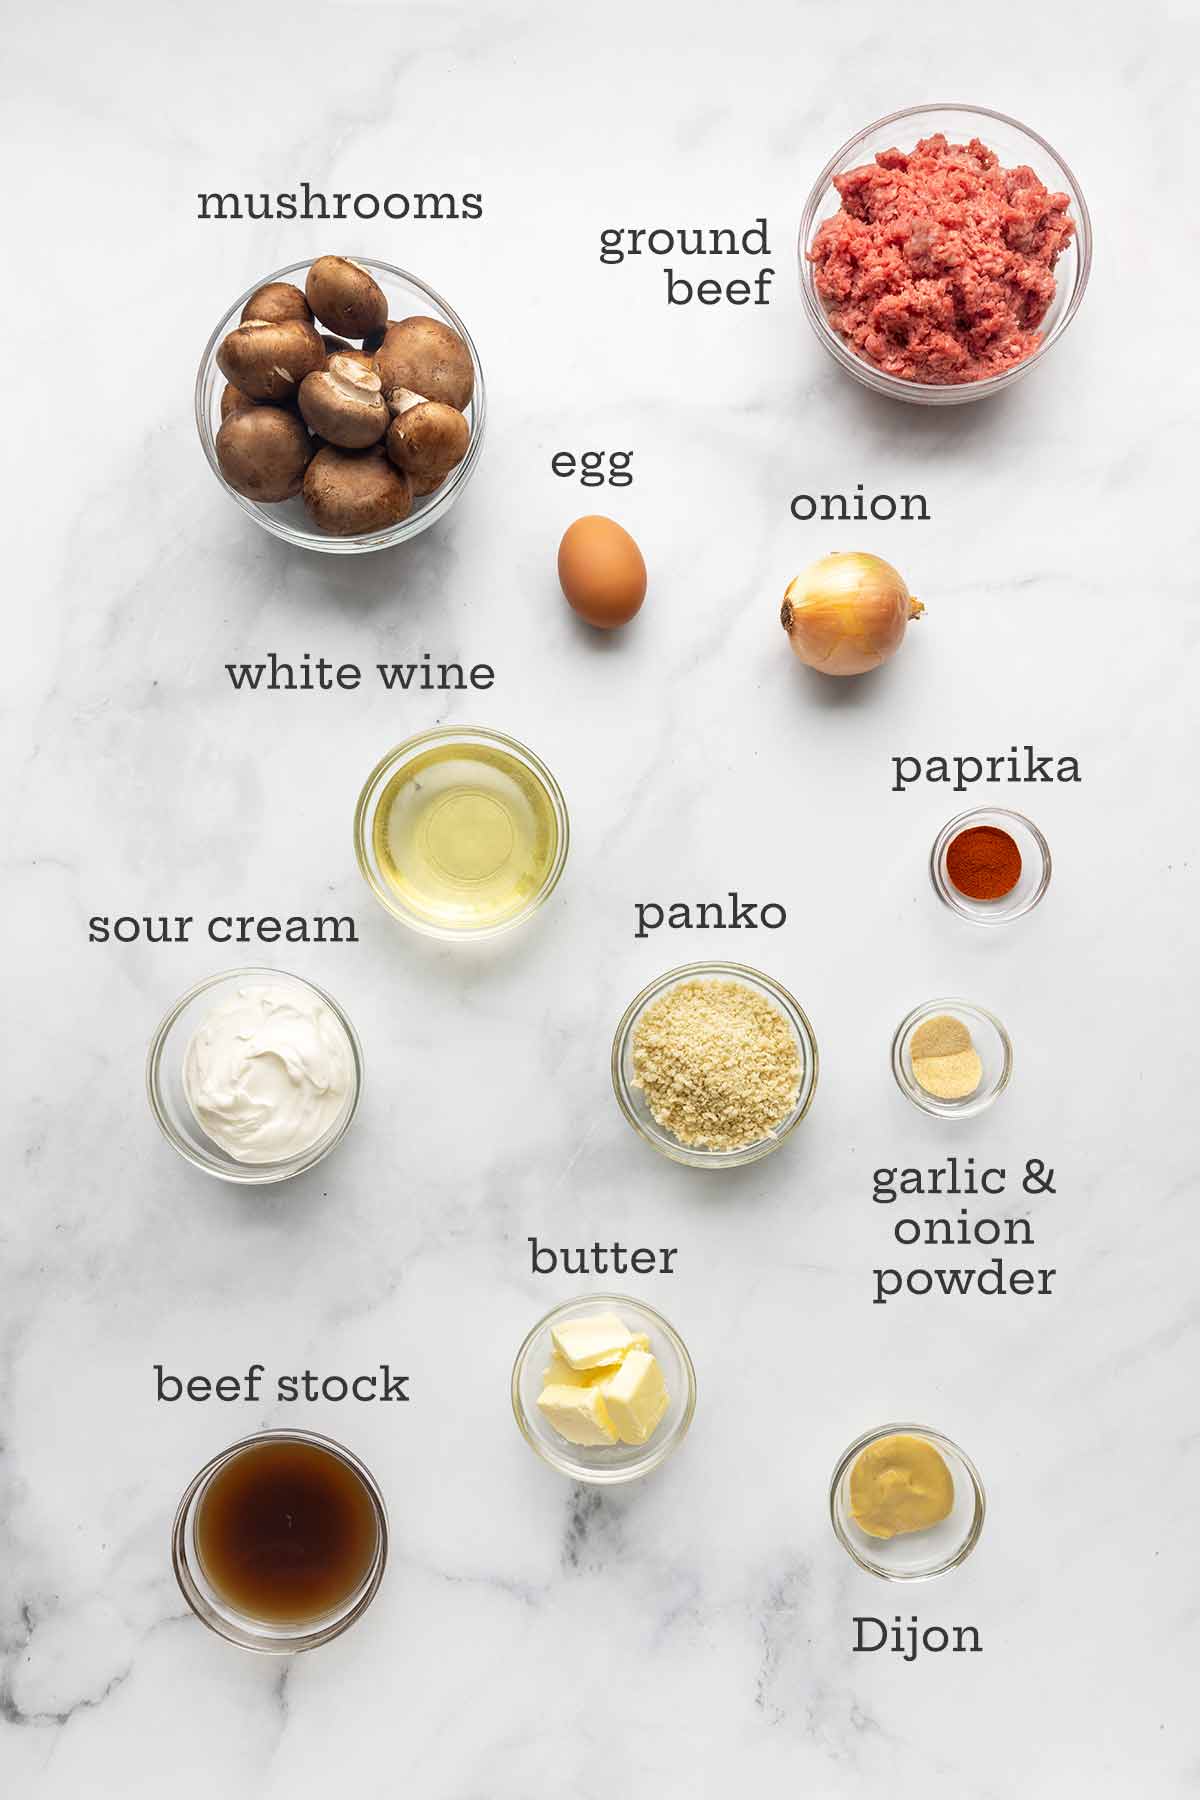 The ingredients for meatball Stroganoff--ground beef, mushrooms, white wine, sour cream, egg, onion, paprika, Dijon mustard, beef stock, butter, and garlic and onion powders.